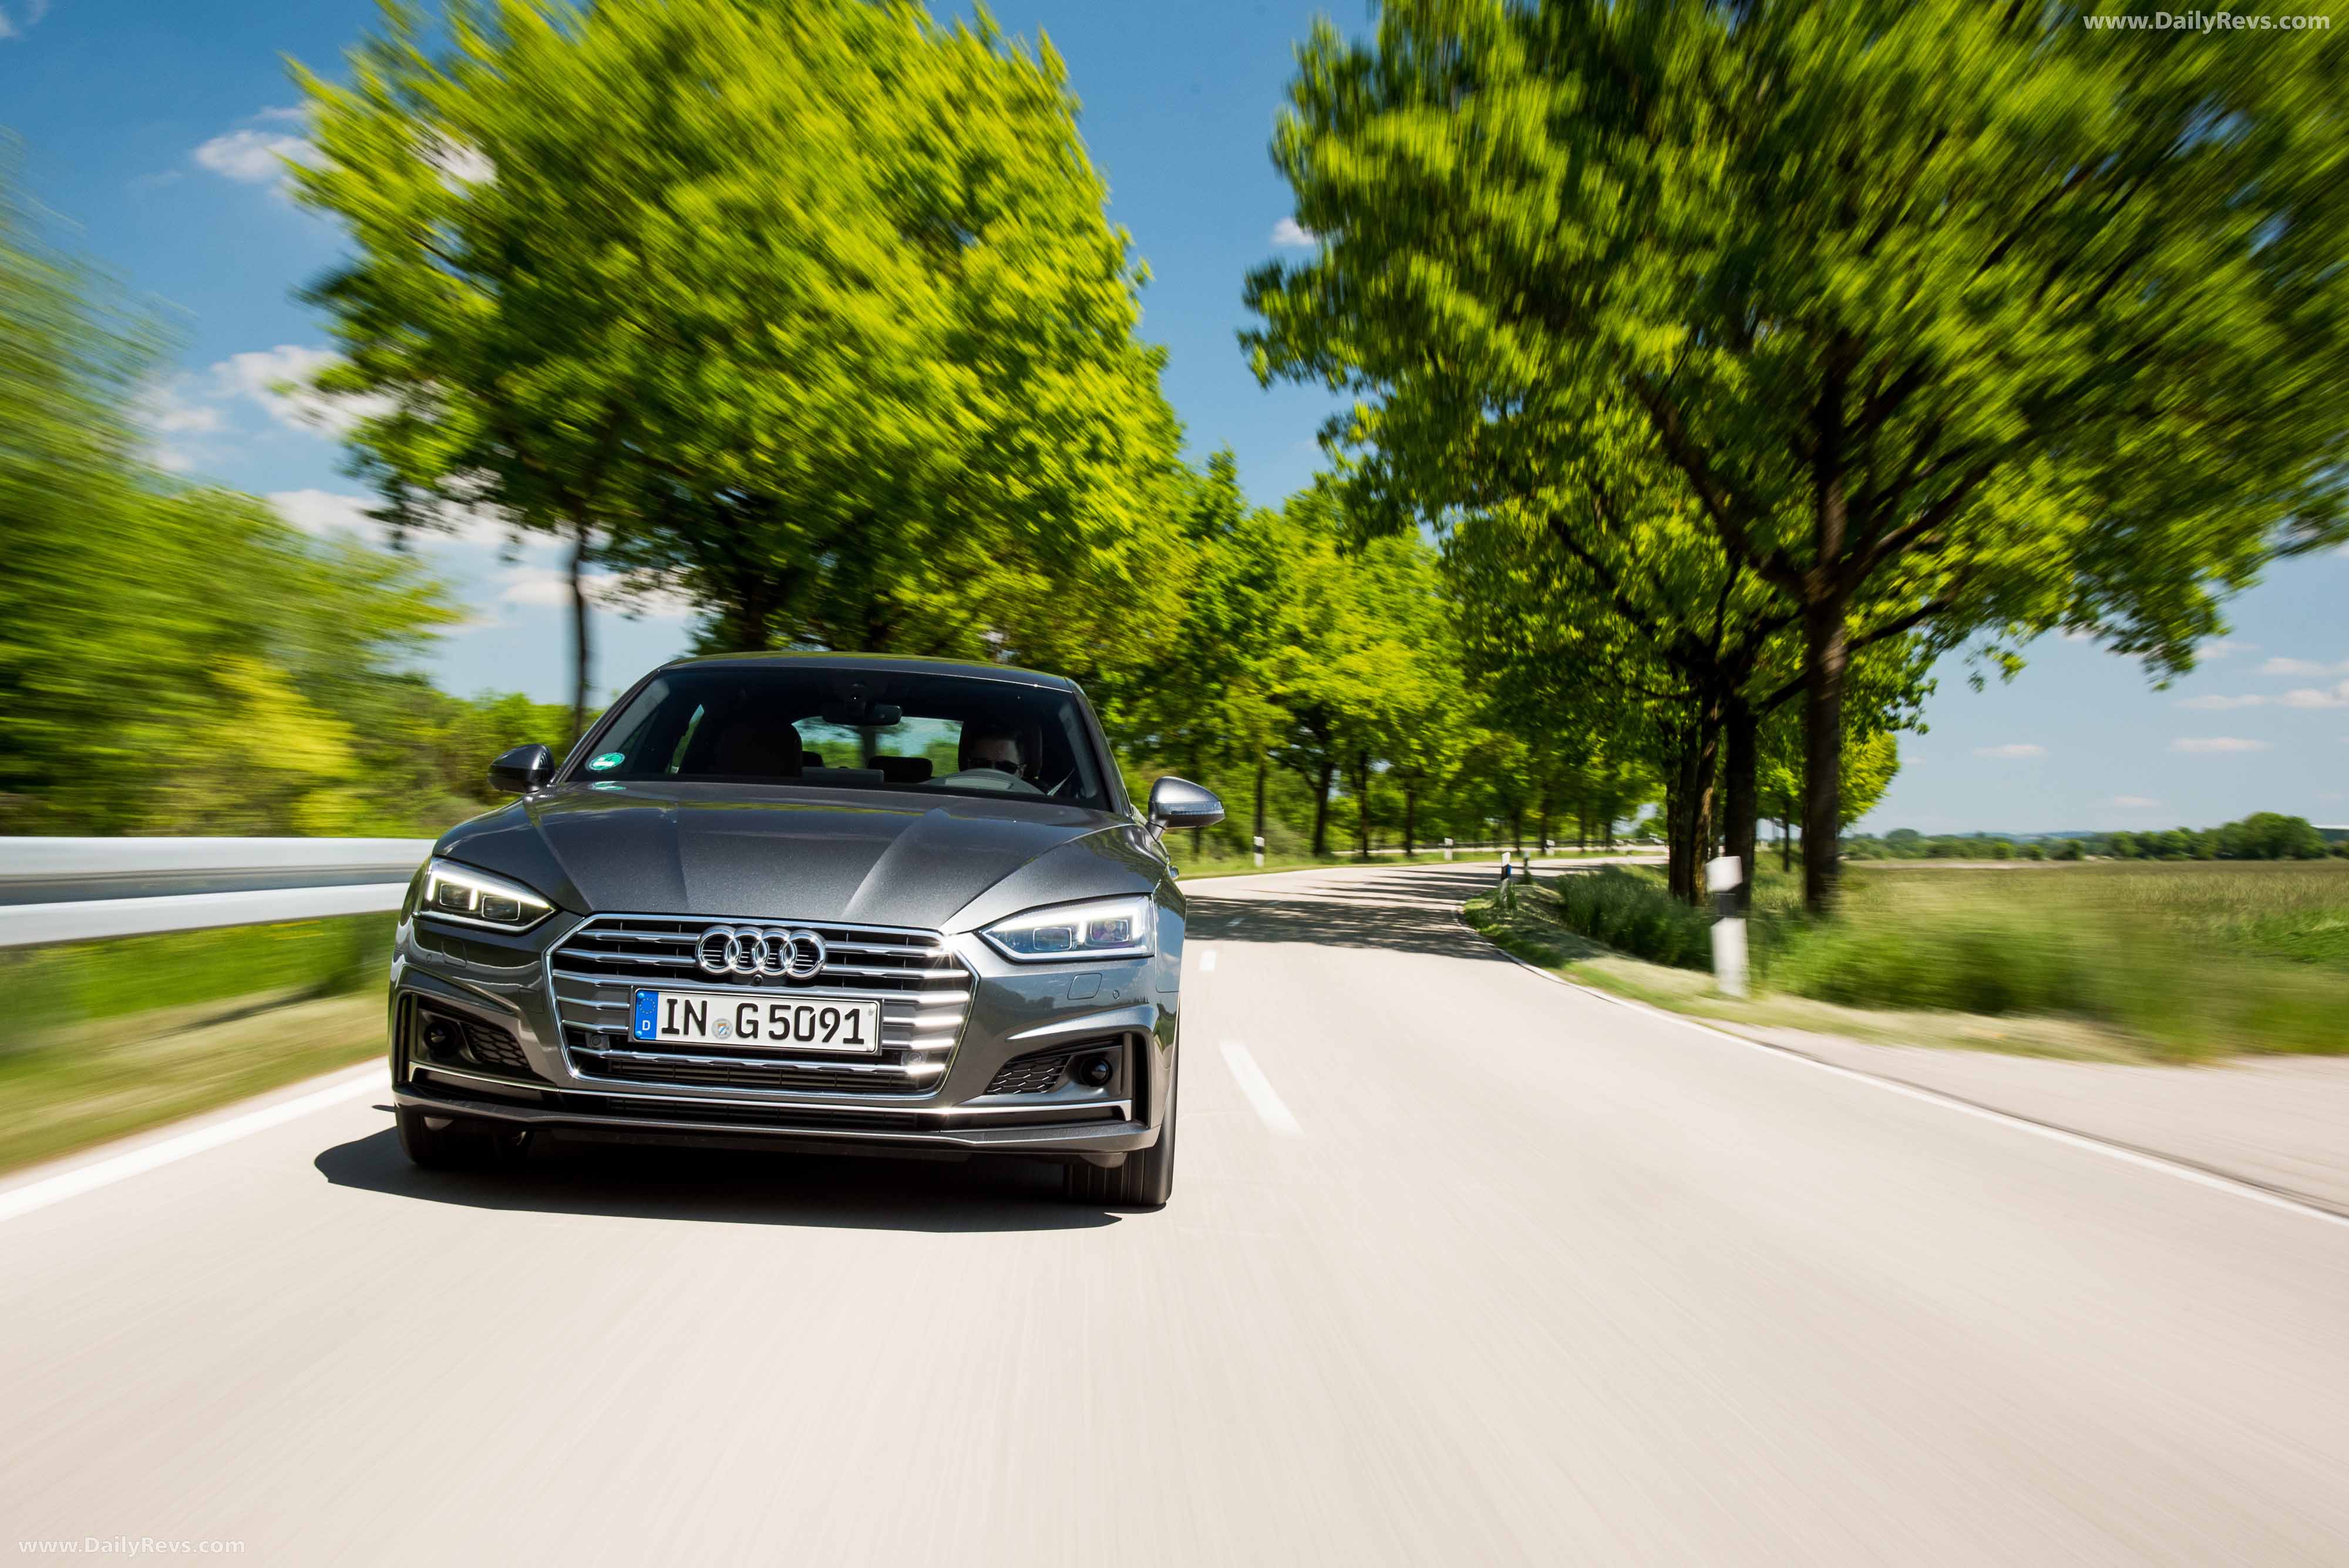 Audi A5 Sportback g-tron interior specifications